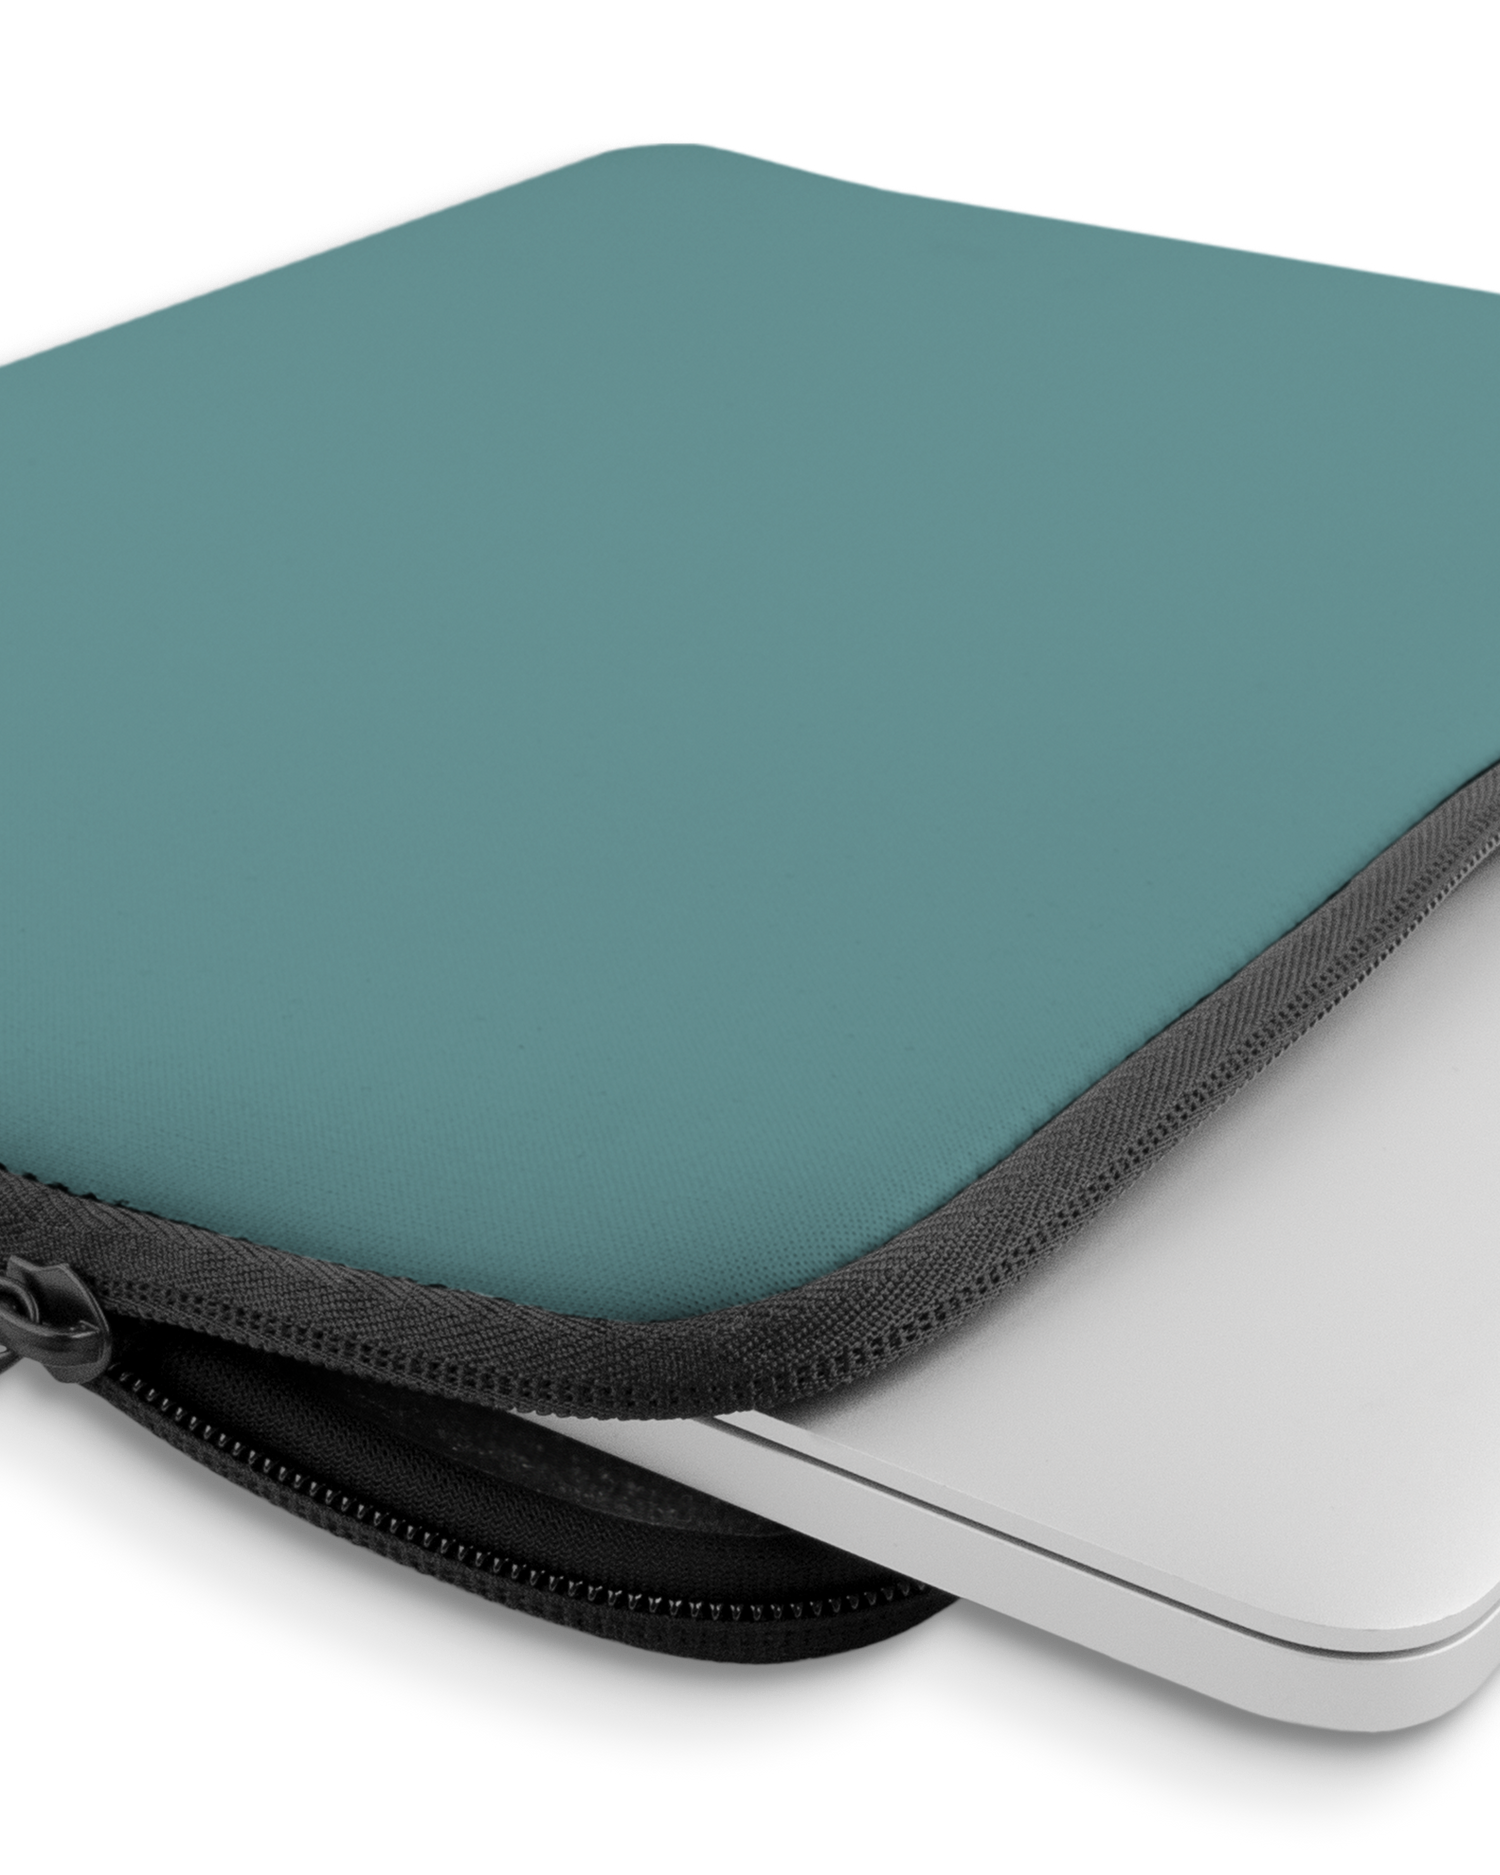 TURQUOISE Laptop Case 13-14 inch with device inside